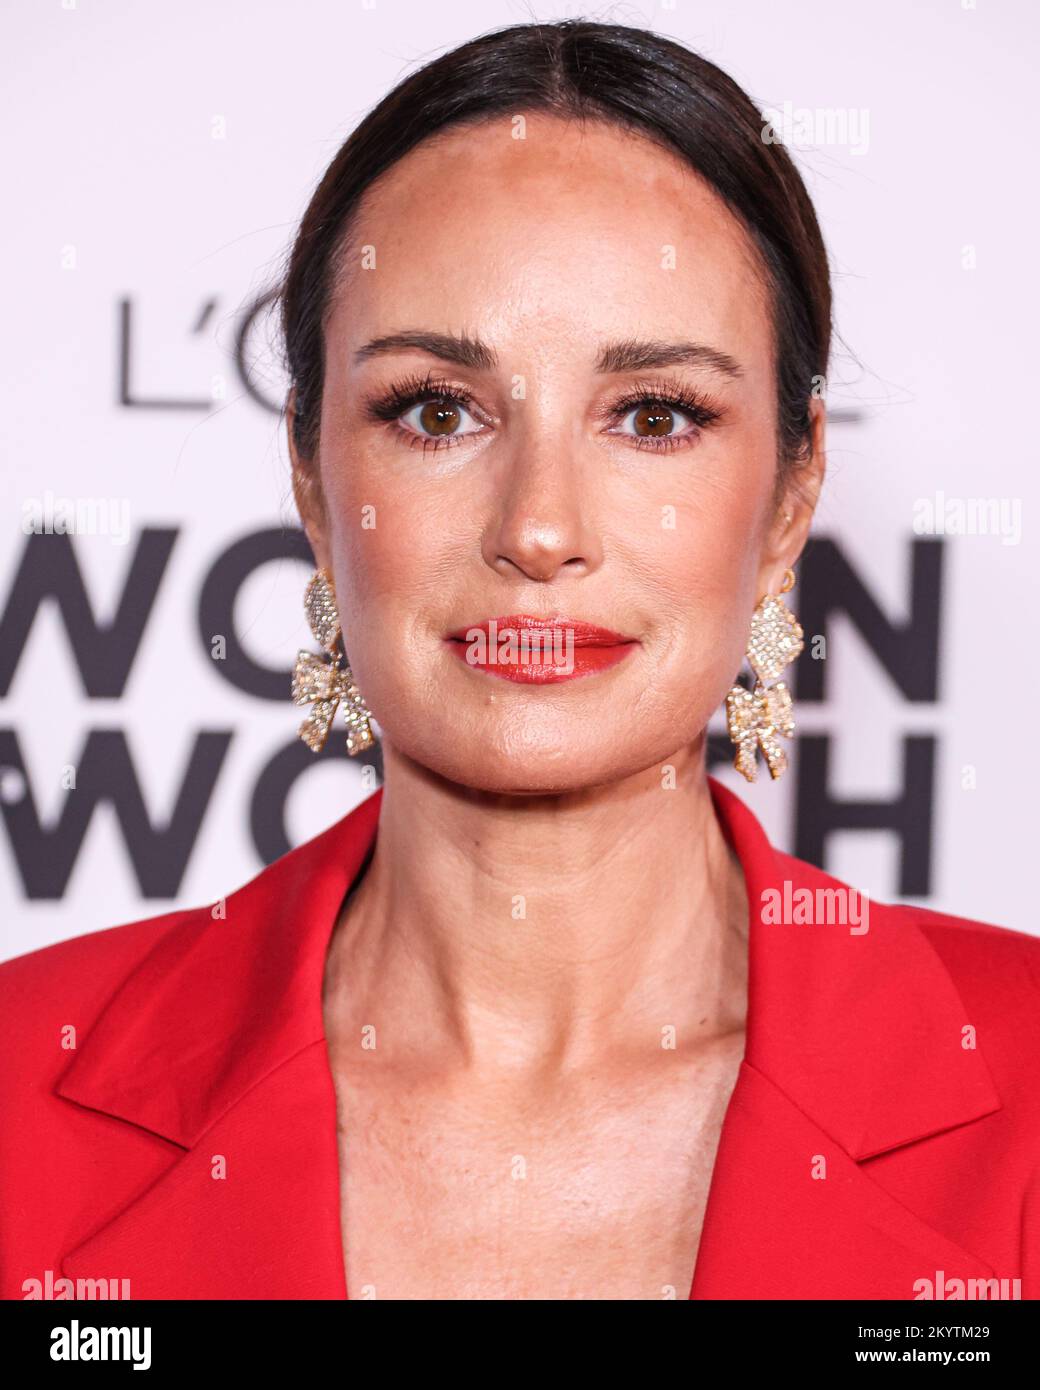 LOS ANGELES, CALIFORNIA, USA - DECEMBER 01: American entertainment reporter Catt Sadler arrives at the L'Oreal Paris' Women Of Worth Celebration 2022 held at The Ebell of Los Angeles on December 1, 2022 in Los Angeles, California, United States. (Photo by Xavier Collin/Image Press Agency) Stock Photo